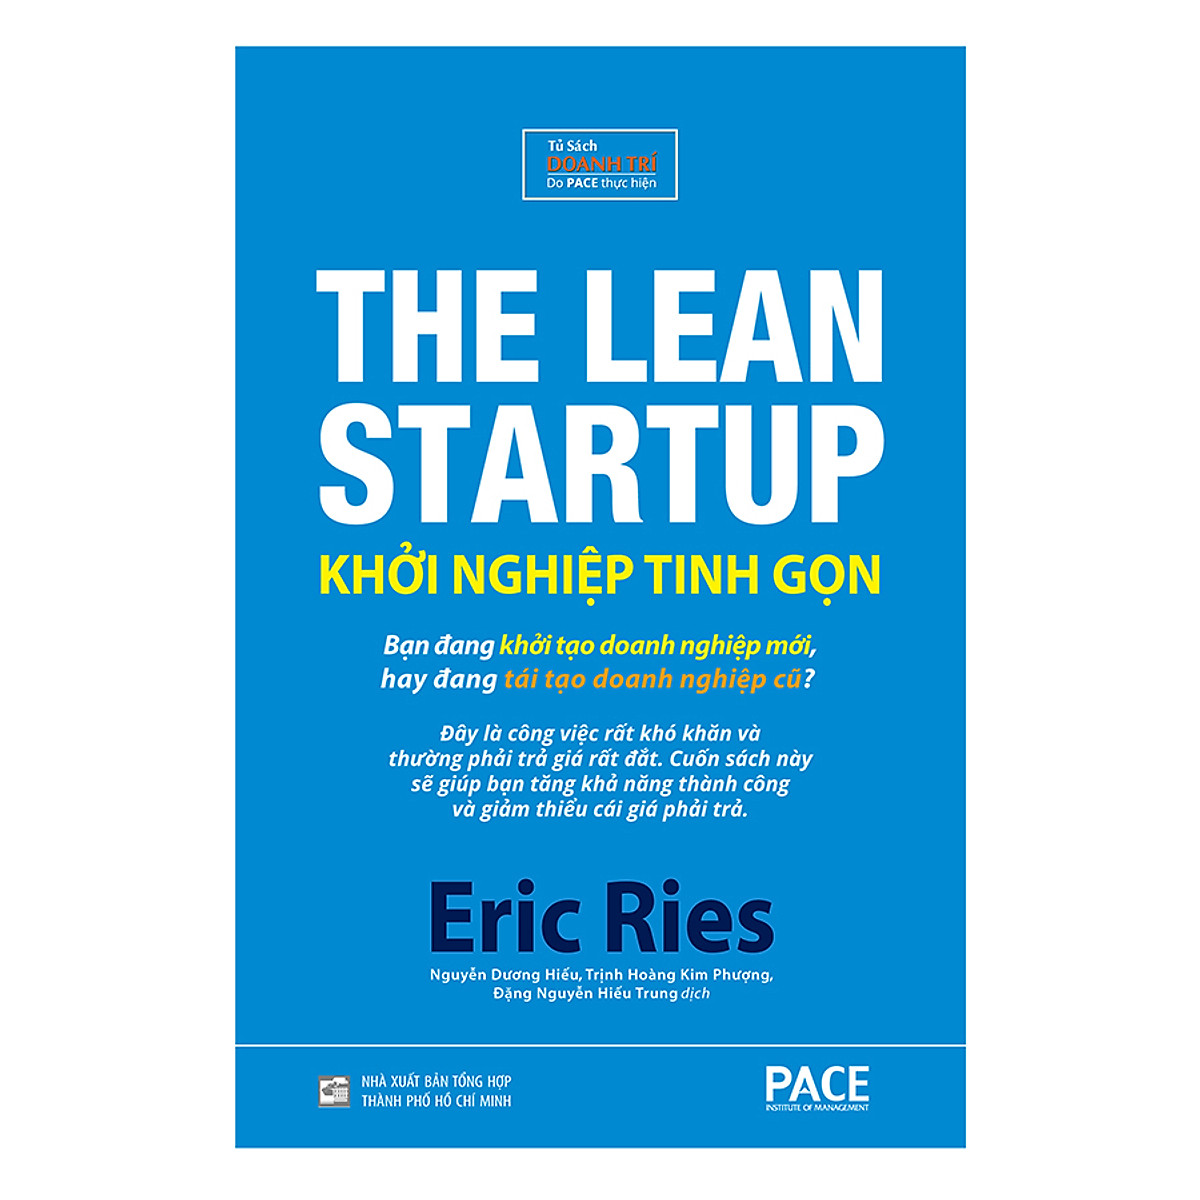 Sách PACE Books - Khởi nghiệp tinh gọn (The Lean Startup) - Eric Ries